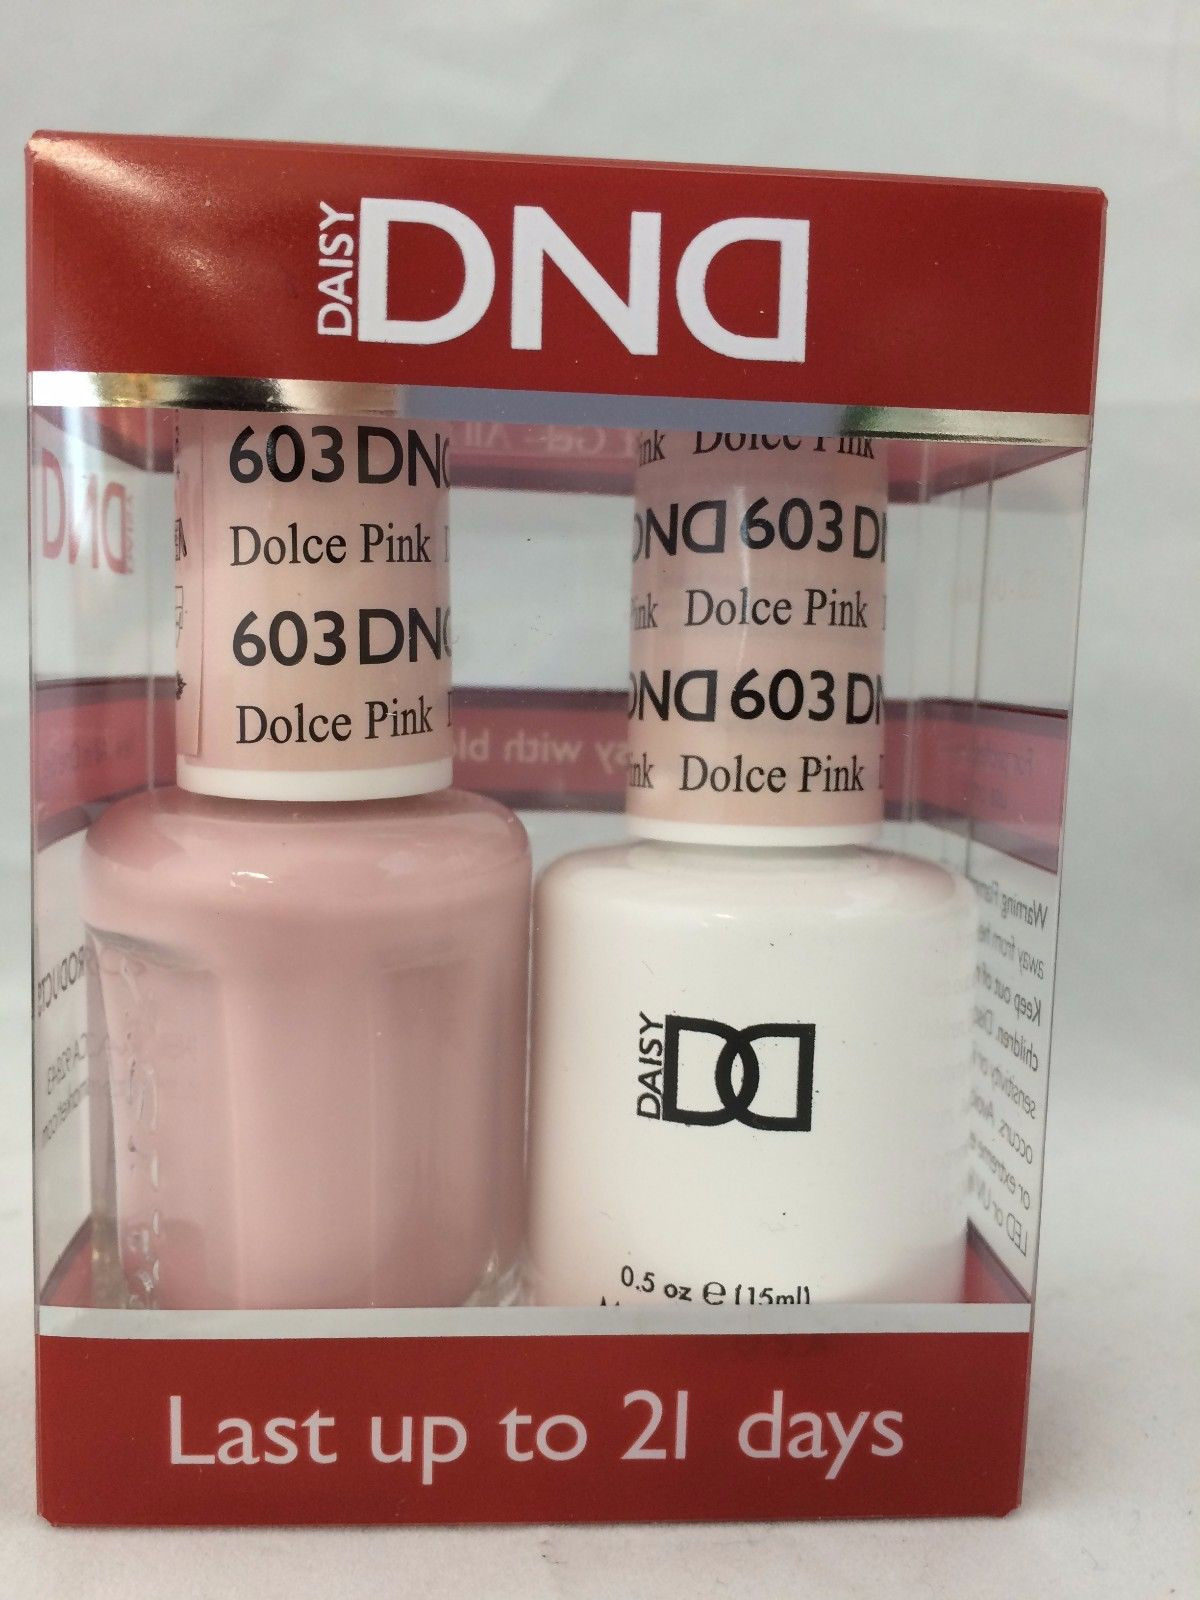 DND Duo GEL + MATCHING Nail Polish SET (587 to 621) - Choose Your Colors